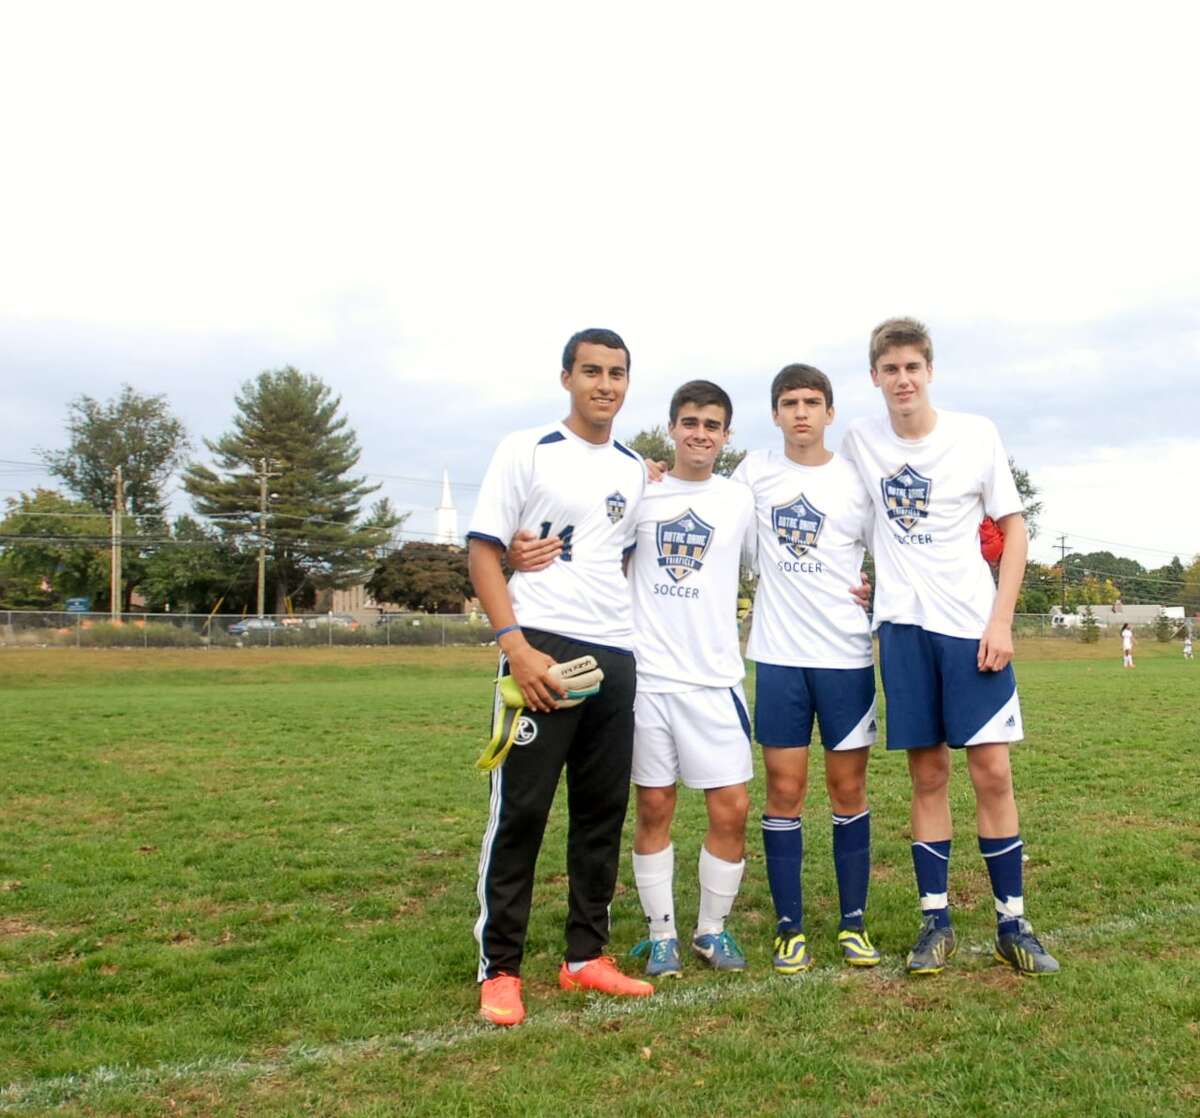 Notre Dame-Fairfield boys soccer captains pose for a picture last week. The Lancers are just a few games away from qualifying for the state tournament for the first time since 1993. Photo by Mary Albl